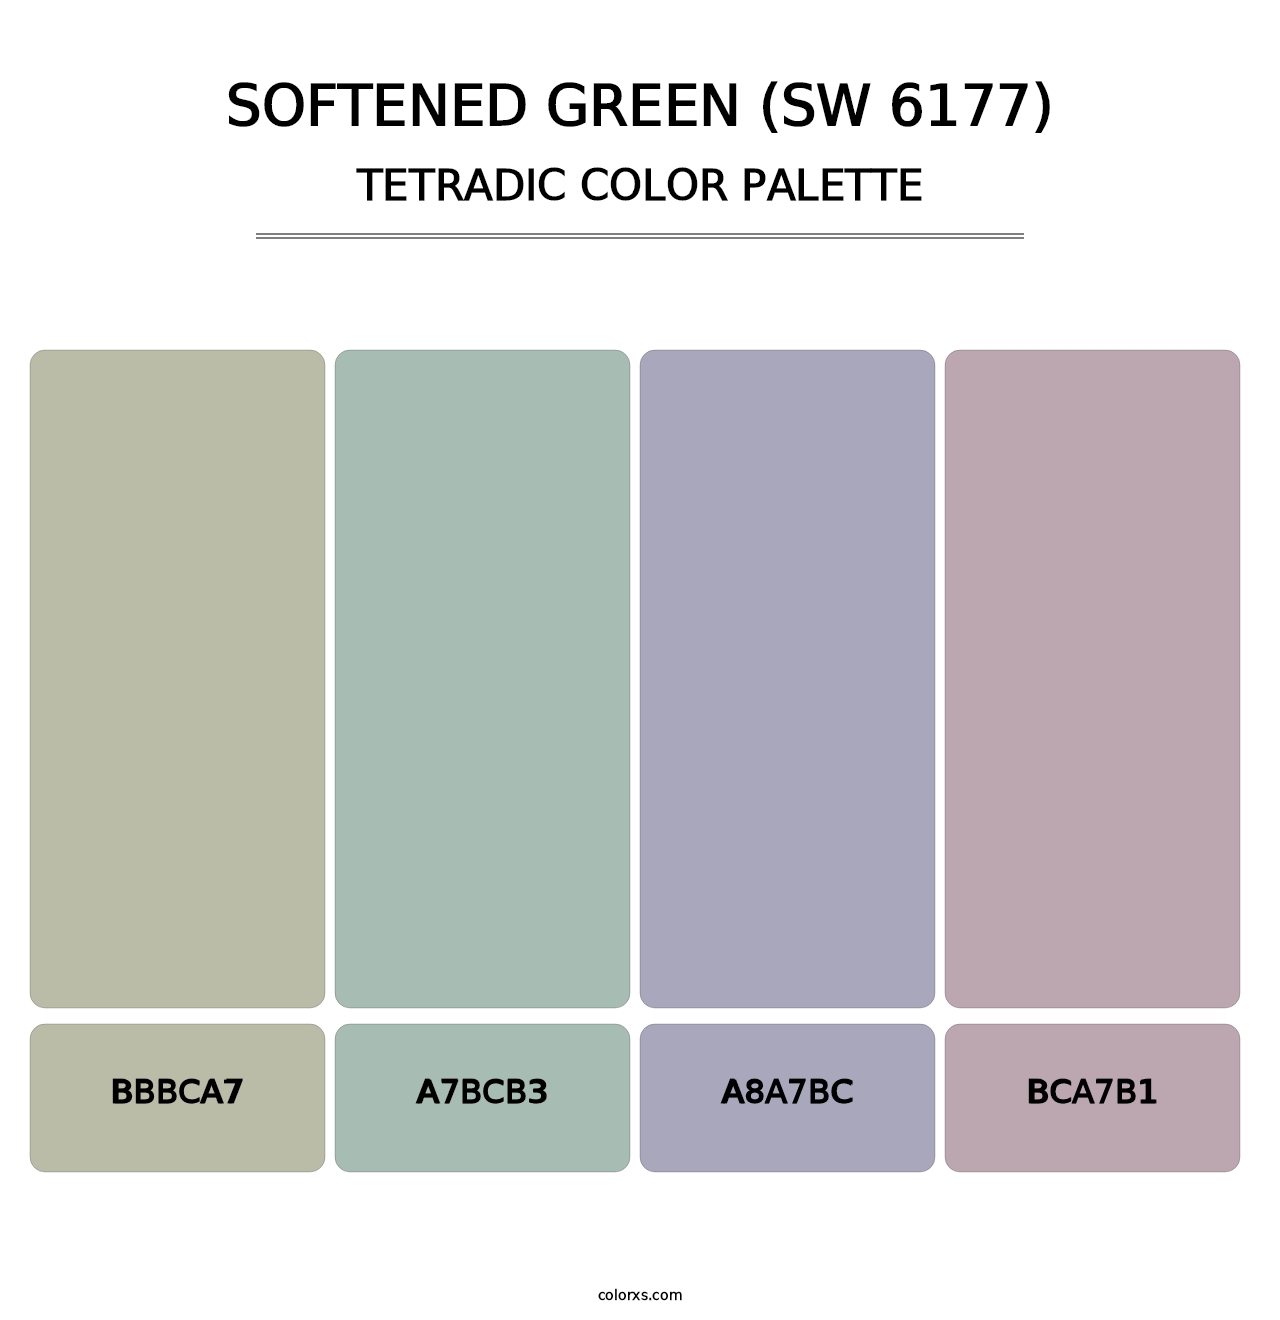 Softened Green (SW 6177) - Tetradic Color Palette